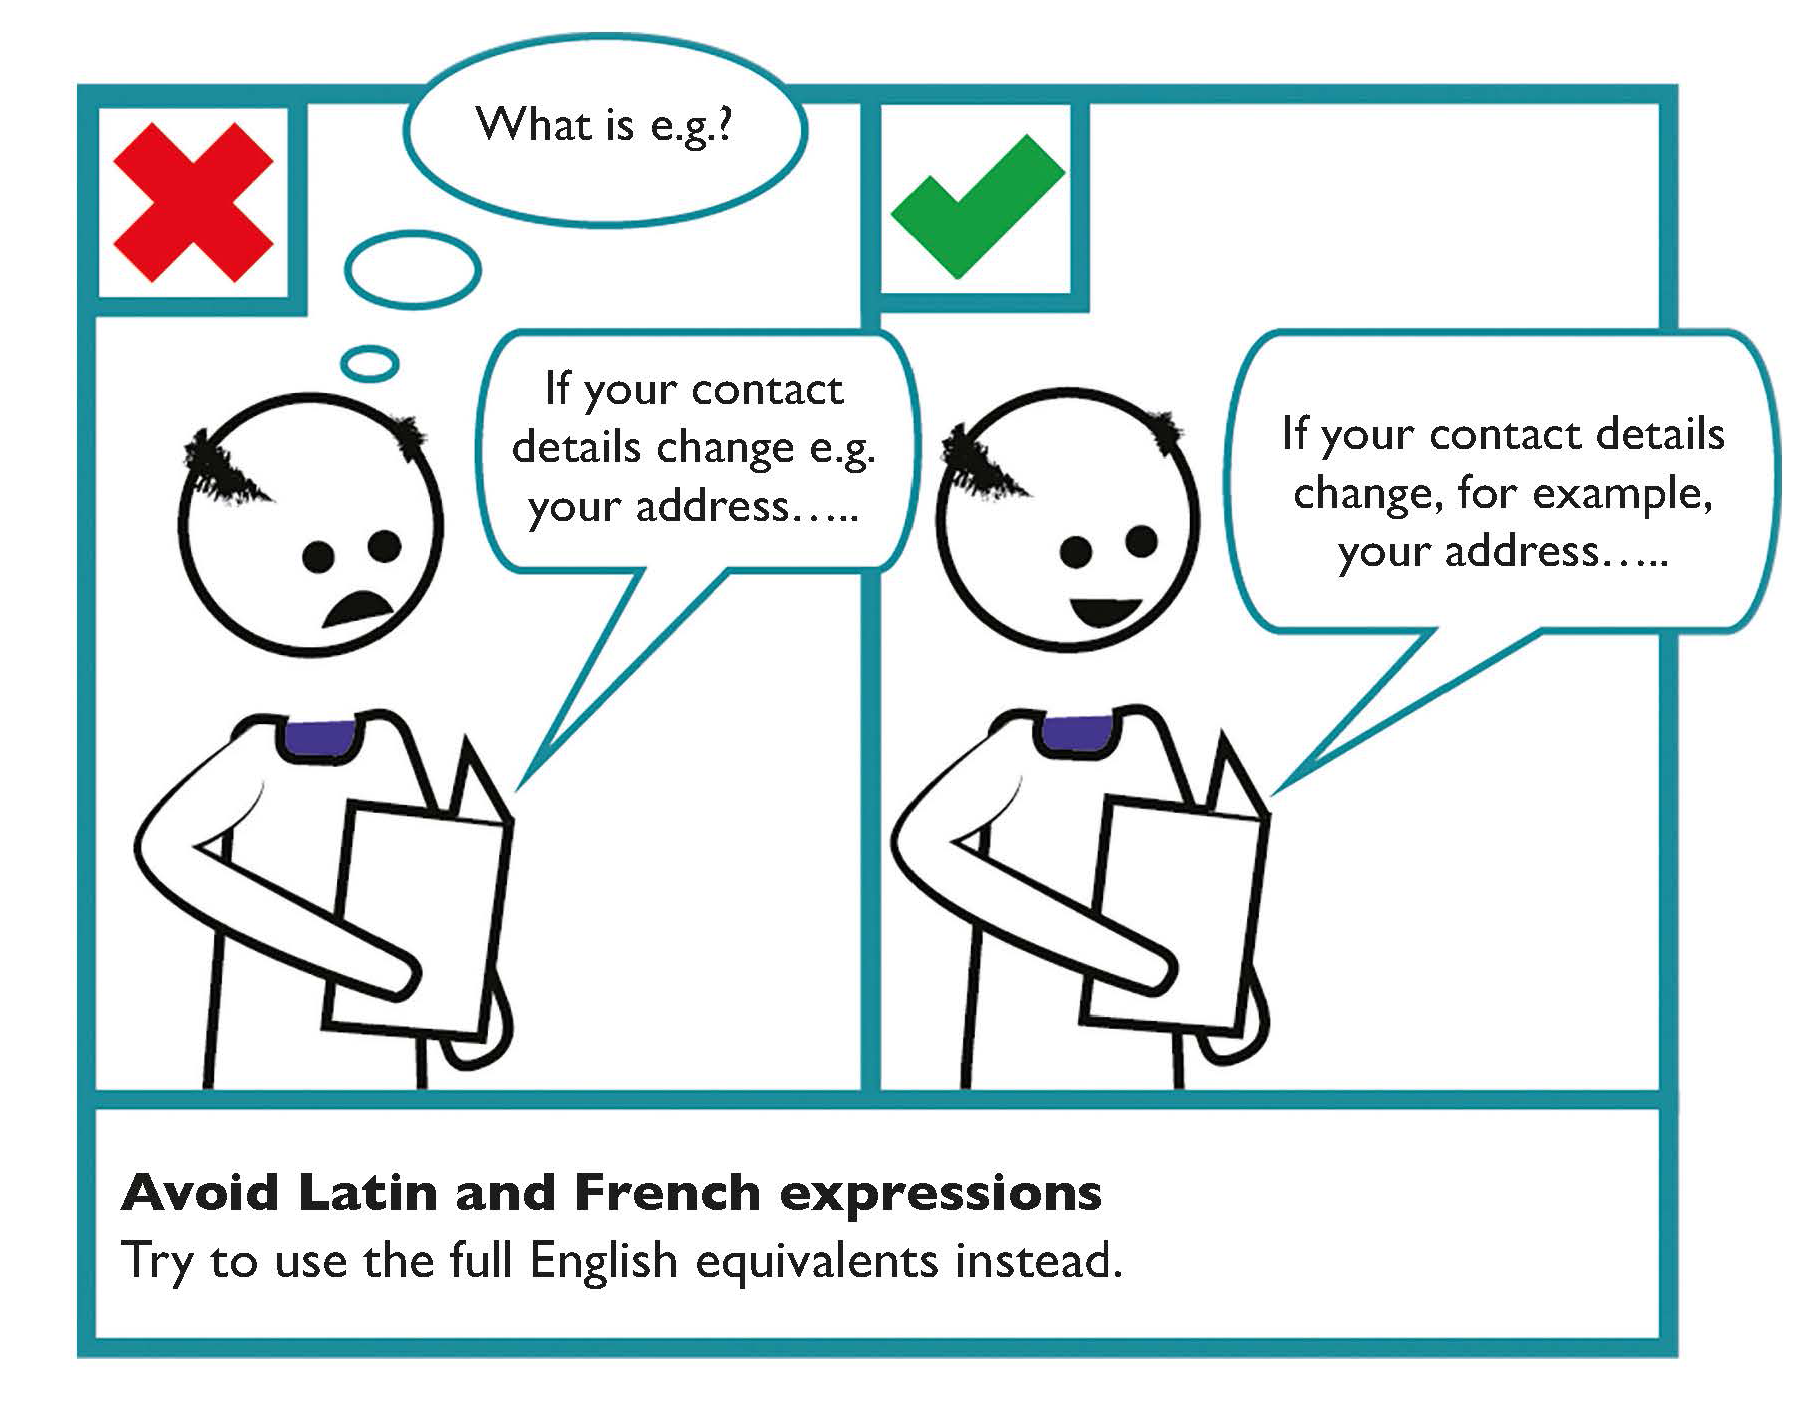 Use full English equivalent instead of Latin and French expressions, use for example instead of e.g.